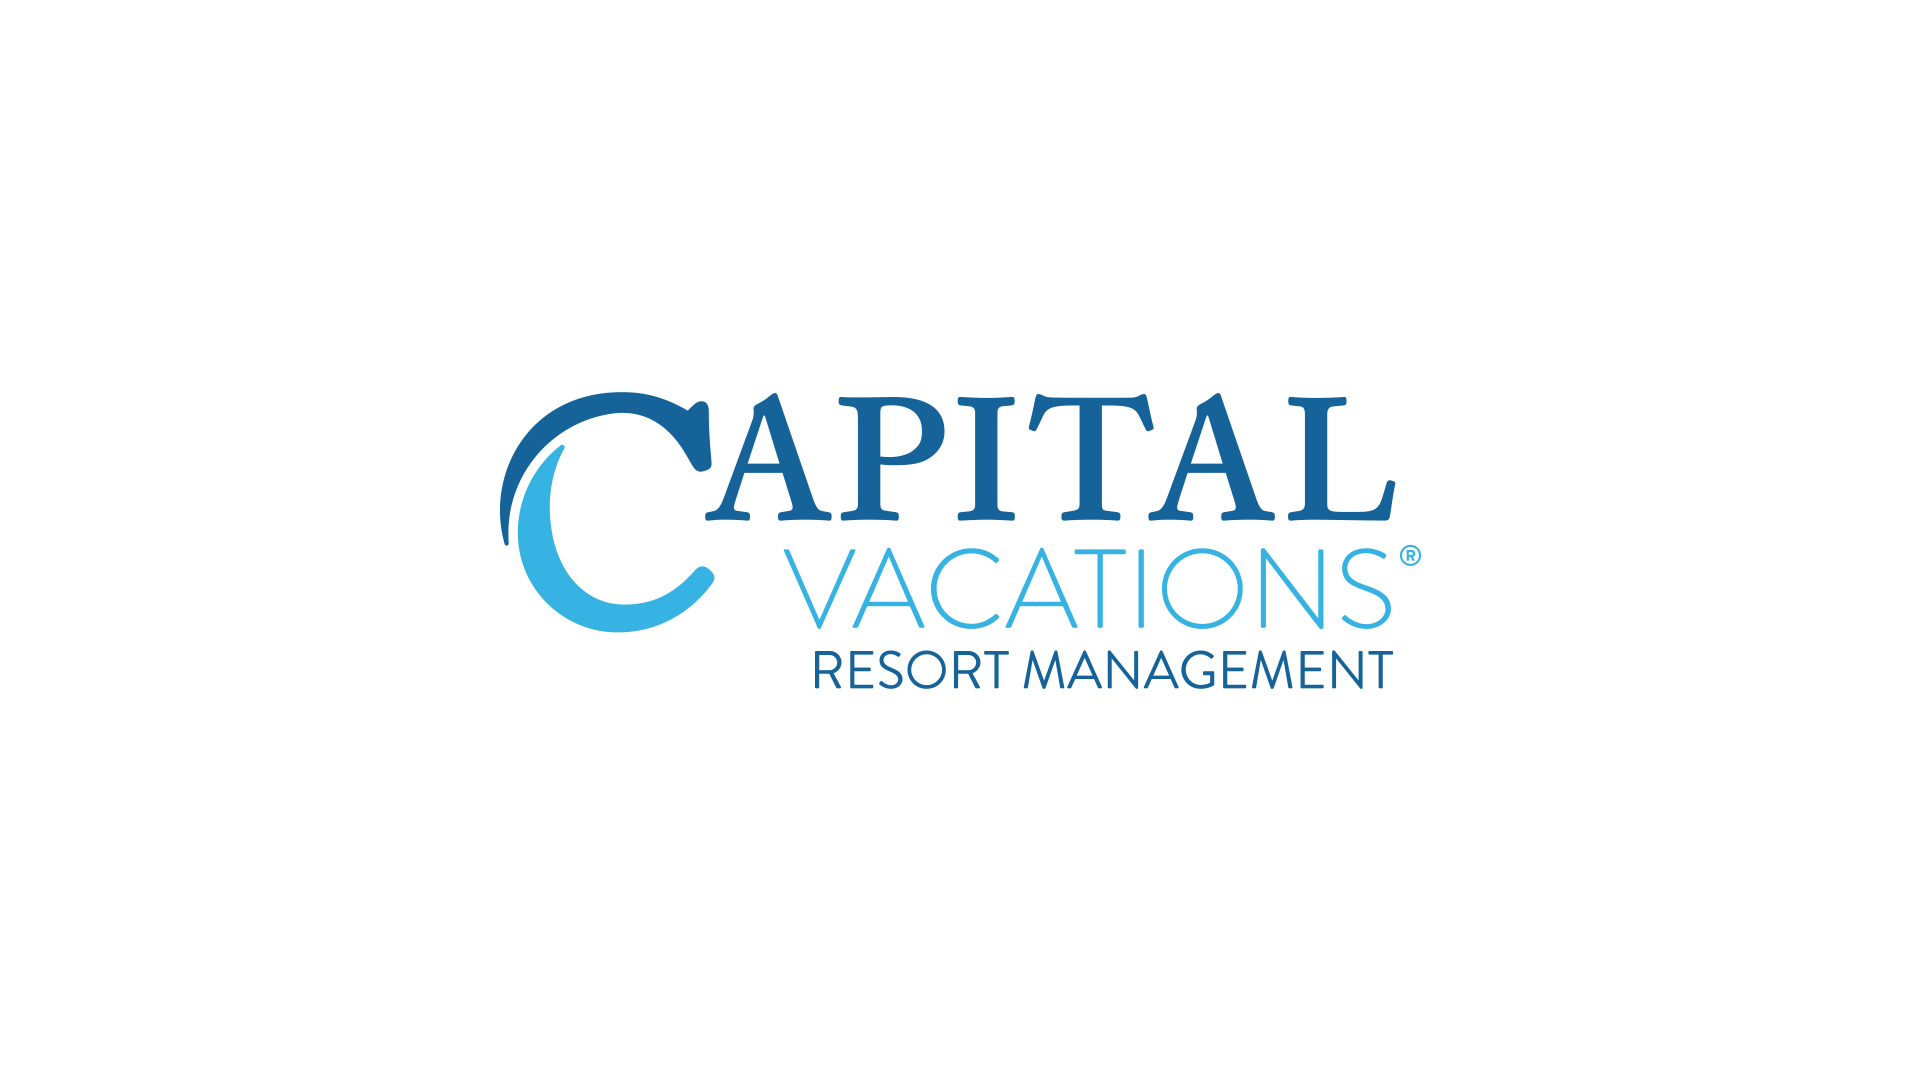 Capital Vacations® Adds Two Resorts to Its Management Portfolio